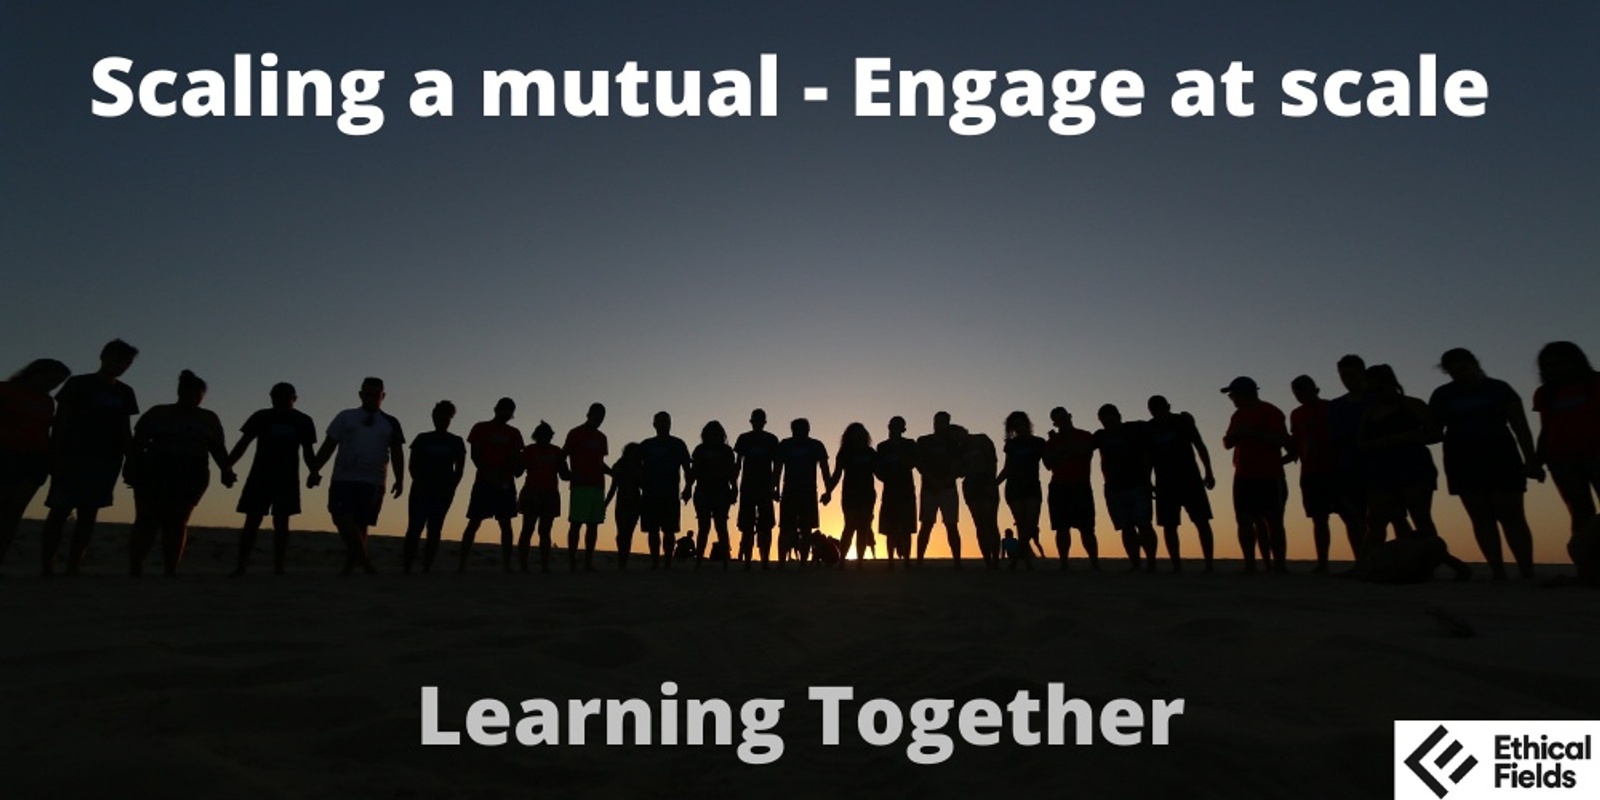 Banner image for Learning Together: Scaling a mutual - how to engage at scale